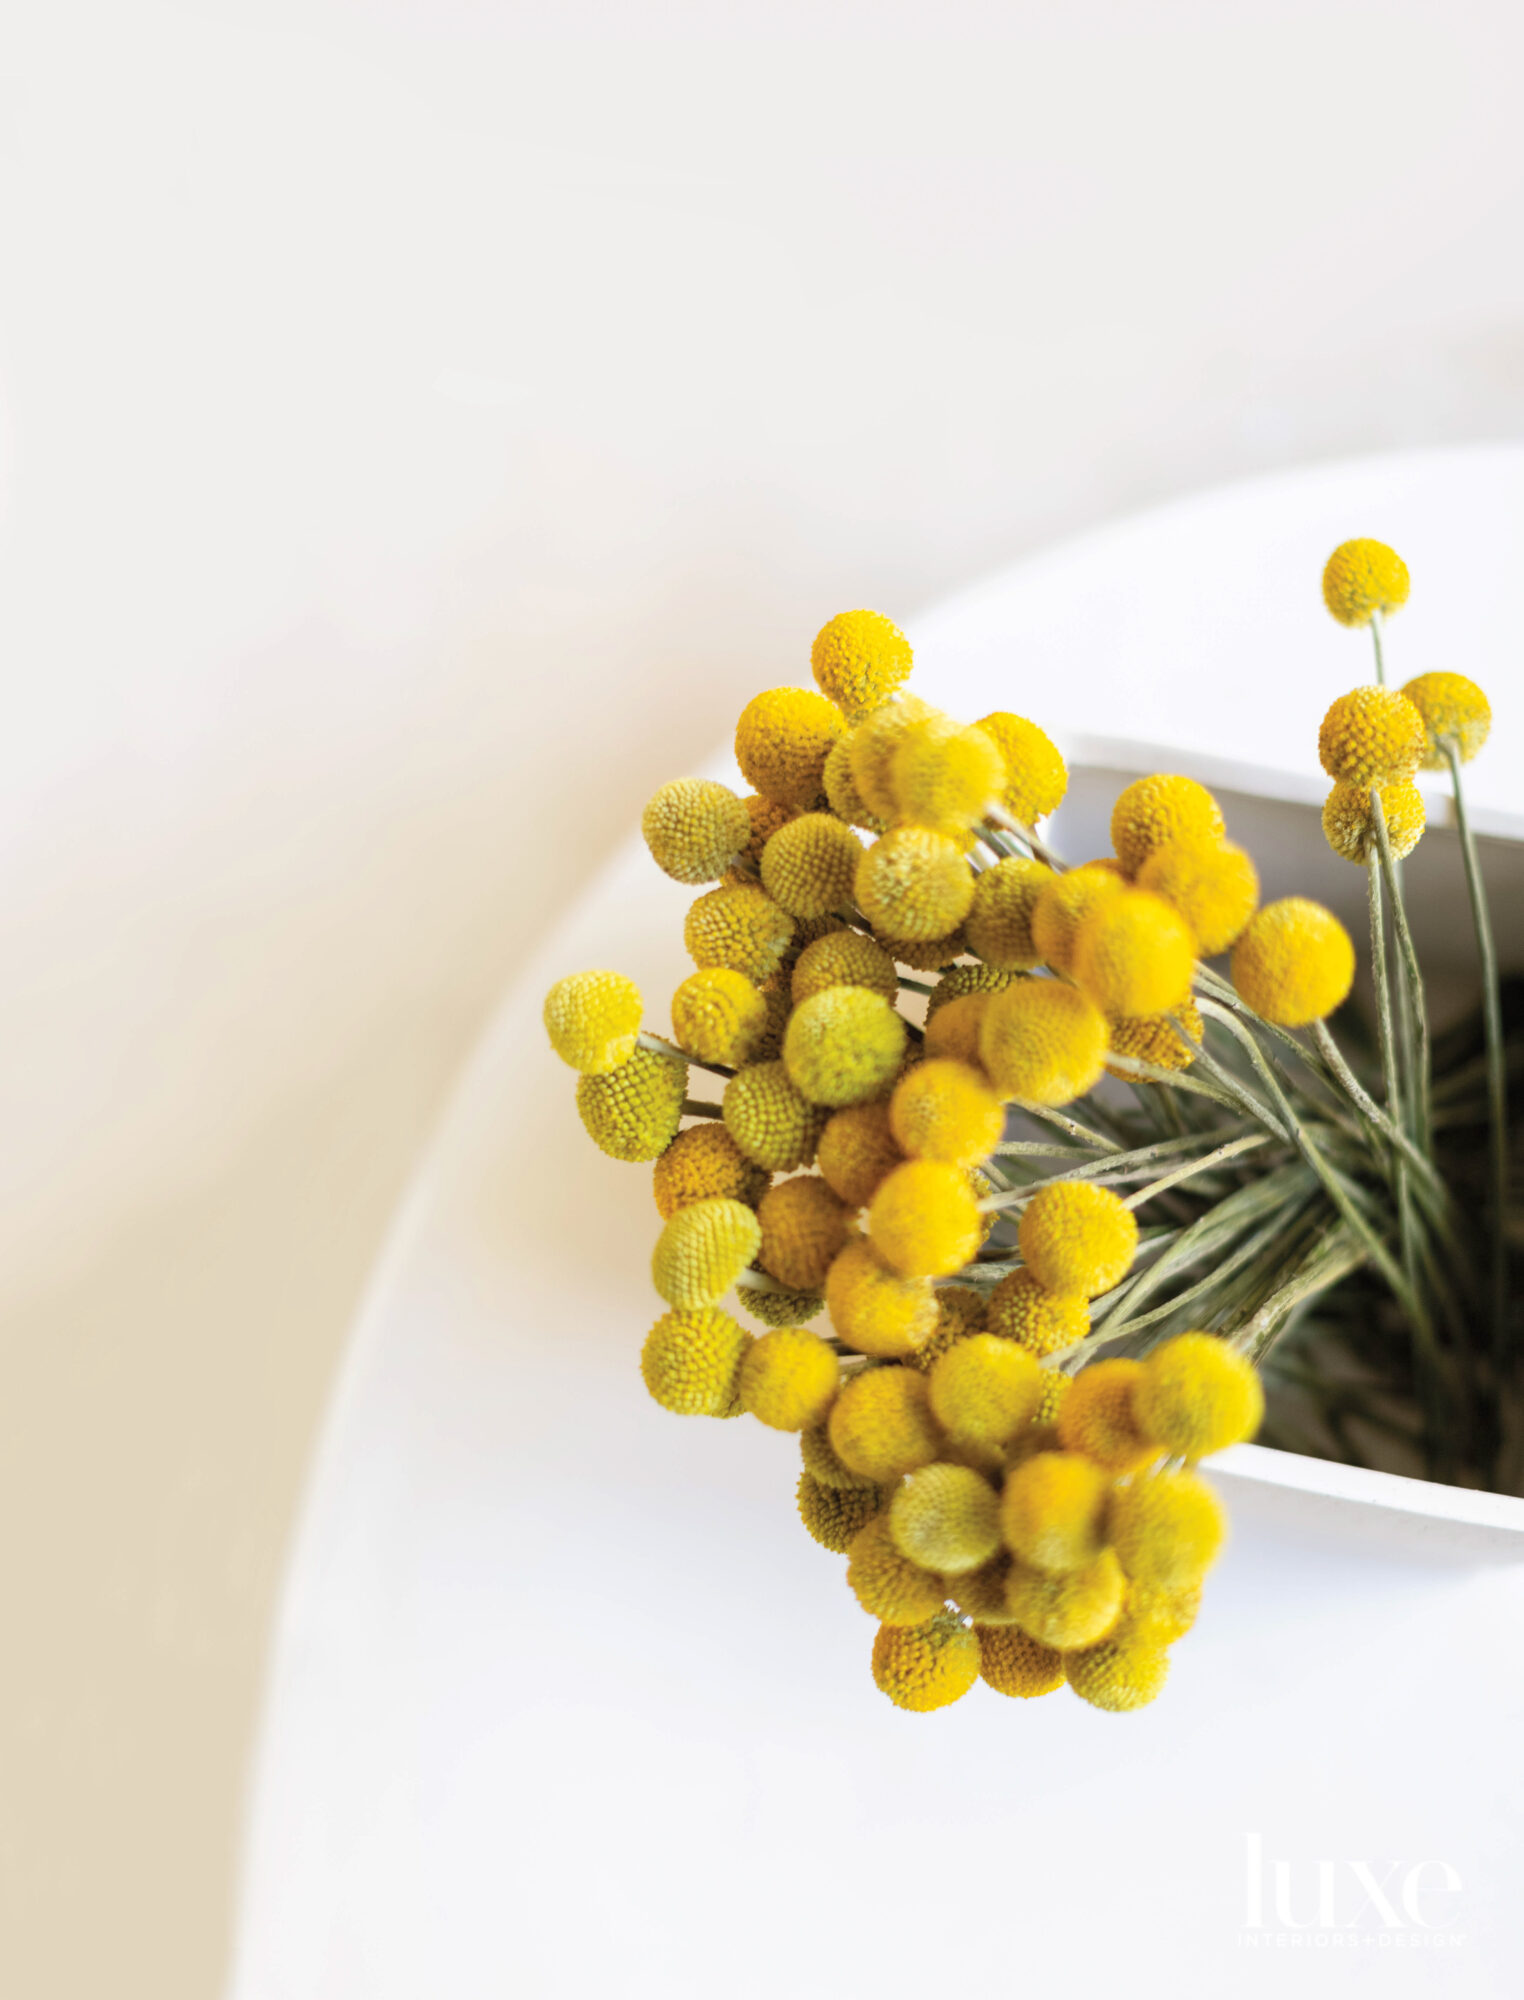 Yellow Billy Balls in a white vase